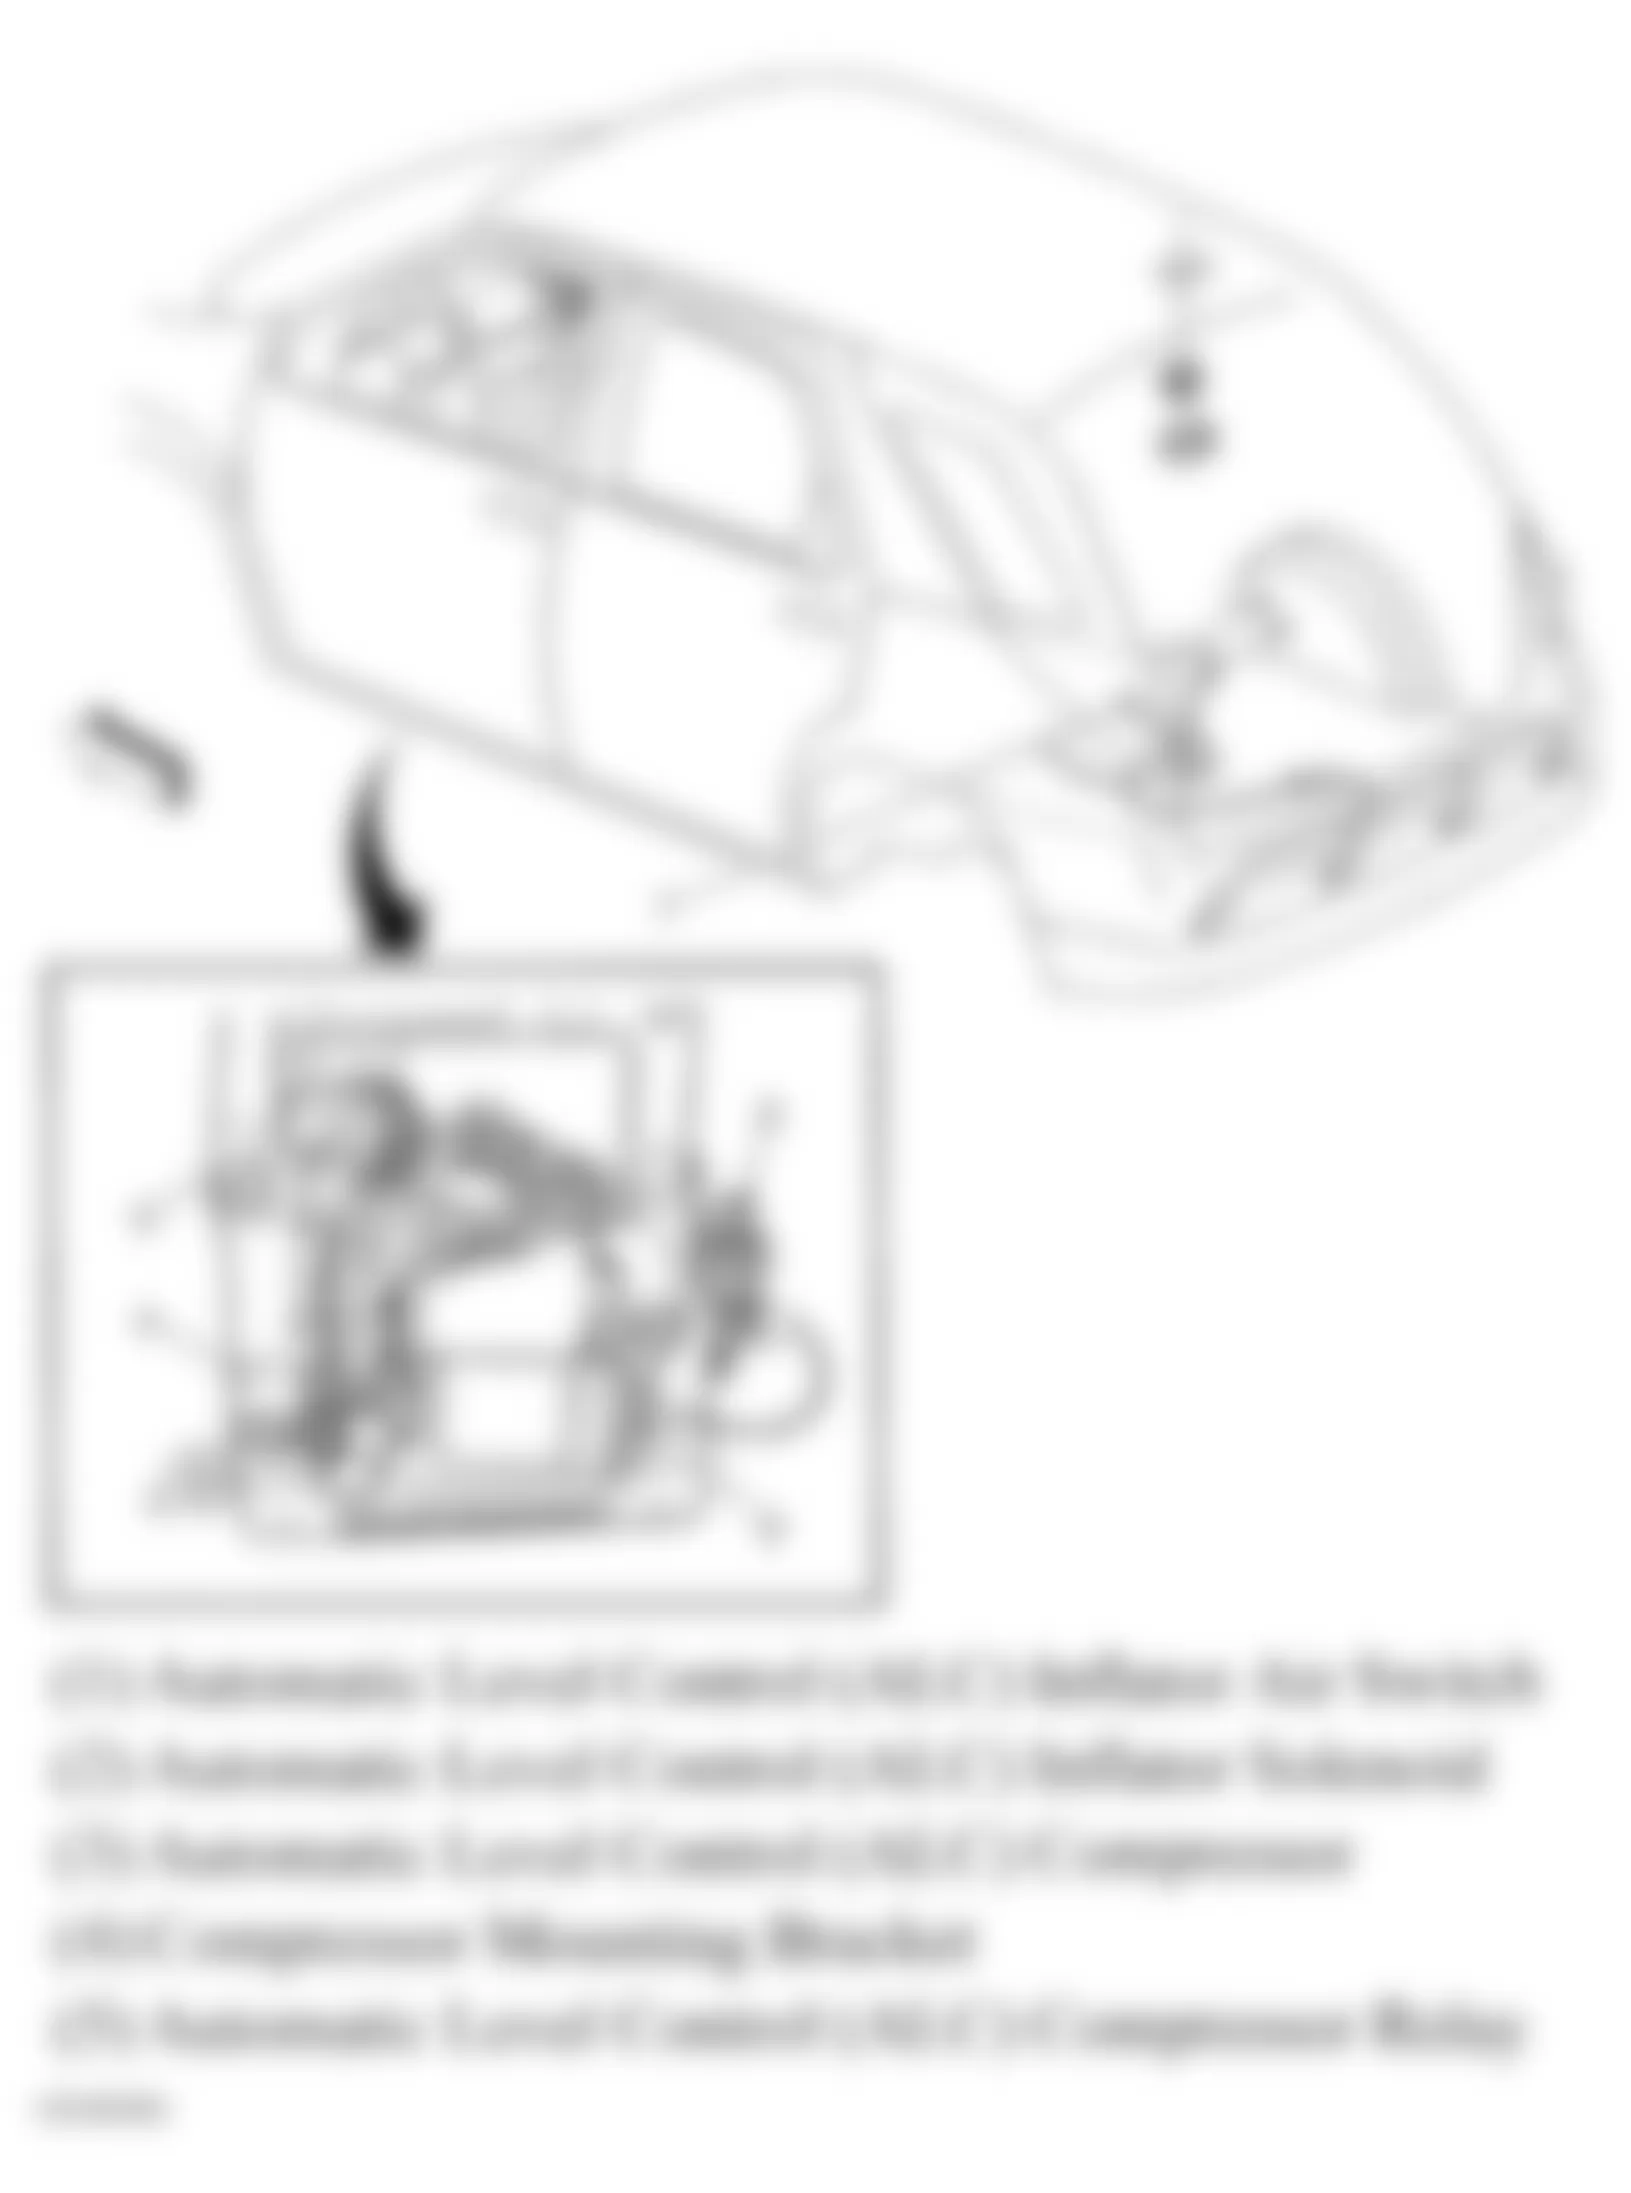 Buick Rendezvous CXL 2006 - Component Locations -  Rear Of Vehicle